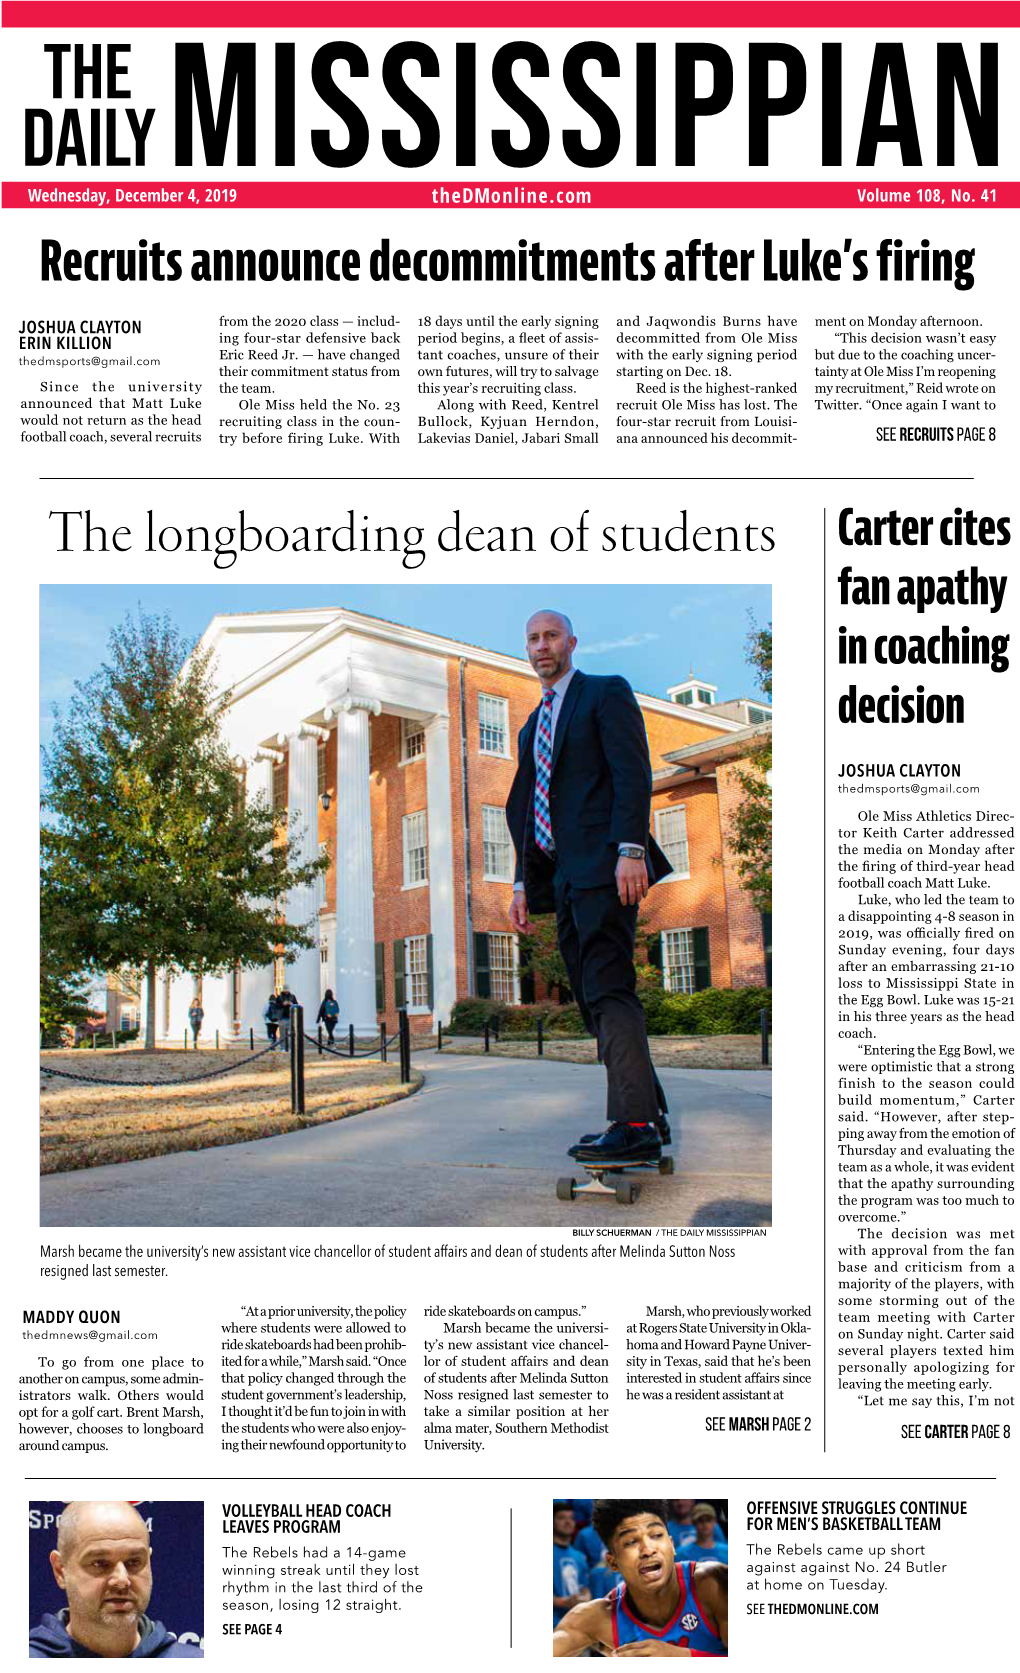 The Longboarding Dean of Students Carter Cites Fan Apathy in Coaching Decision